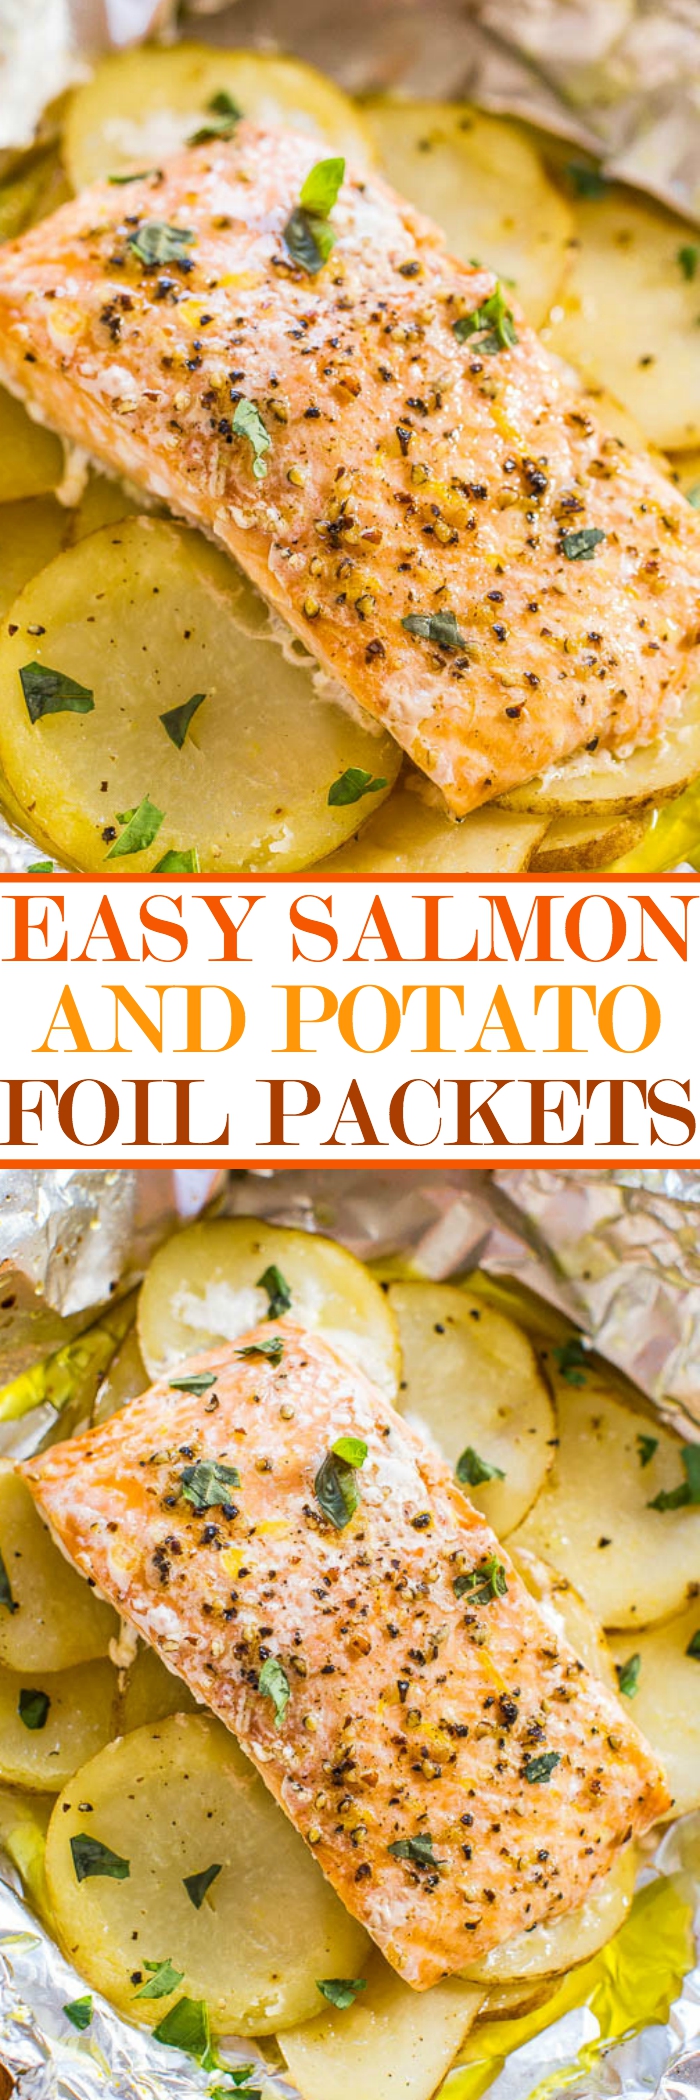 Easy Salmon and Potato Foil Packets - Juicy, moist salmon that's loaded with flavor! Ready in 30 minutes, zero cleanup, and a foolproof way to cook salmon and look like a gourmet cook!!